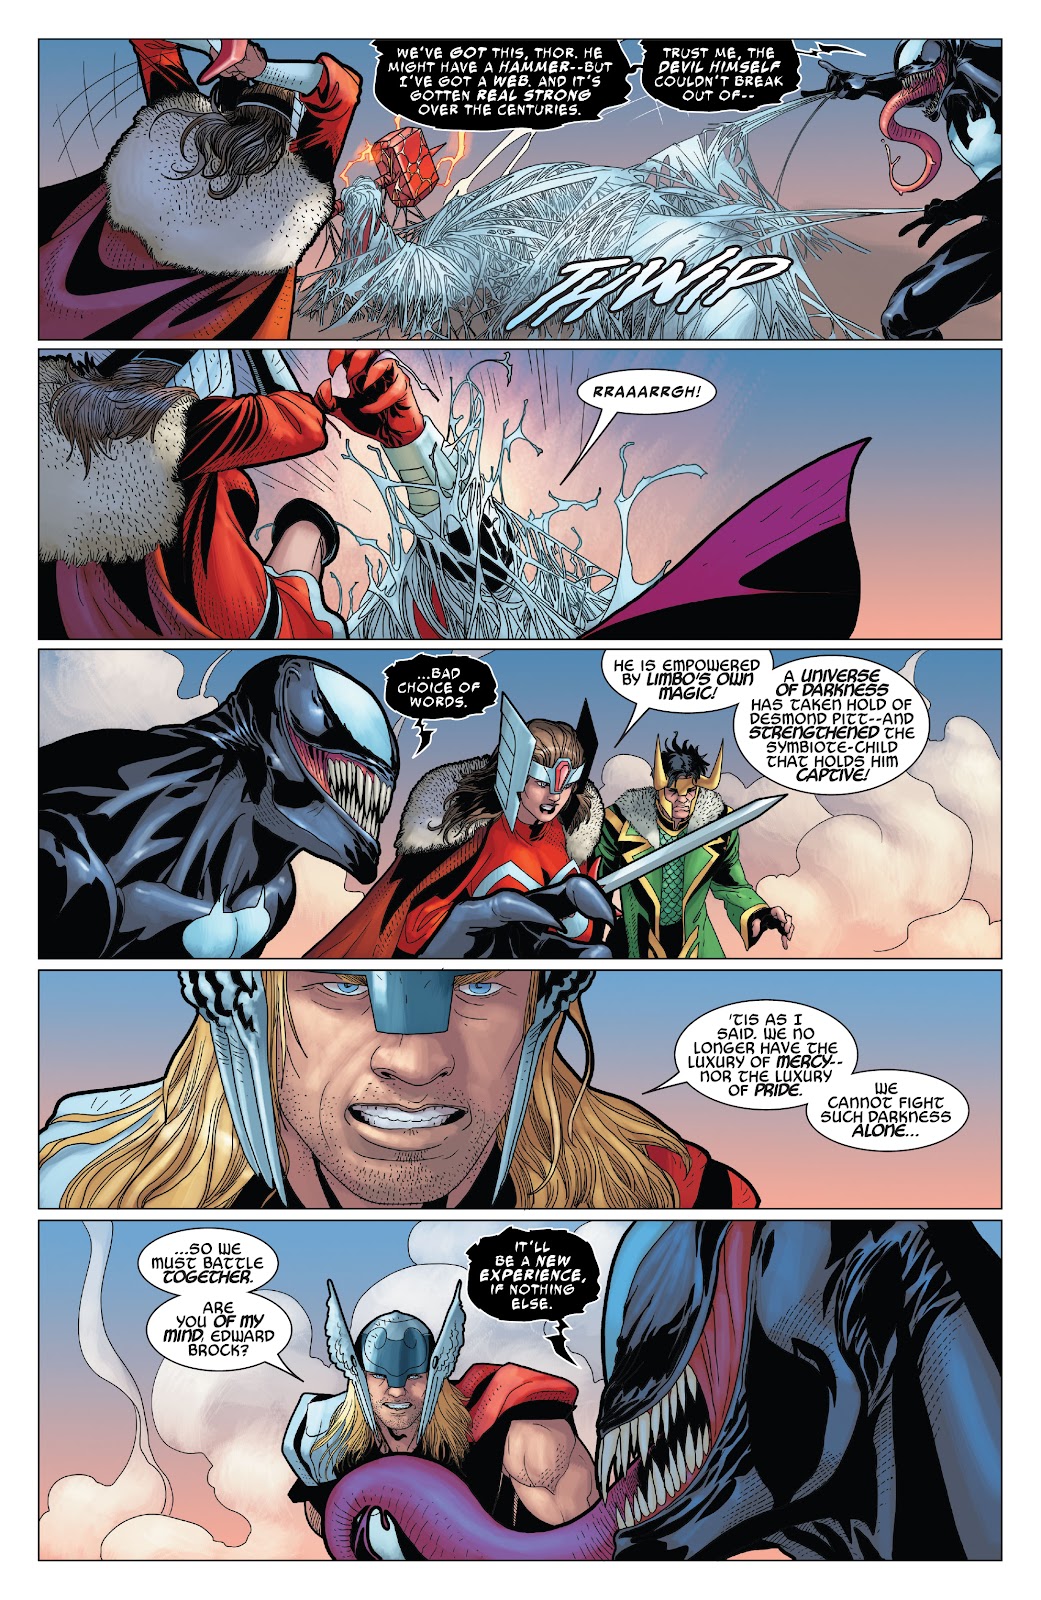 Thor Bonds With A Symbiote